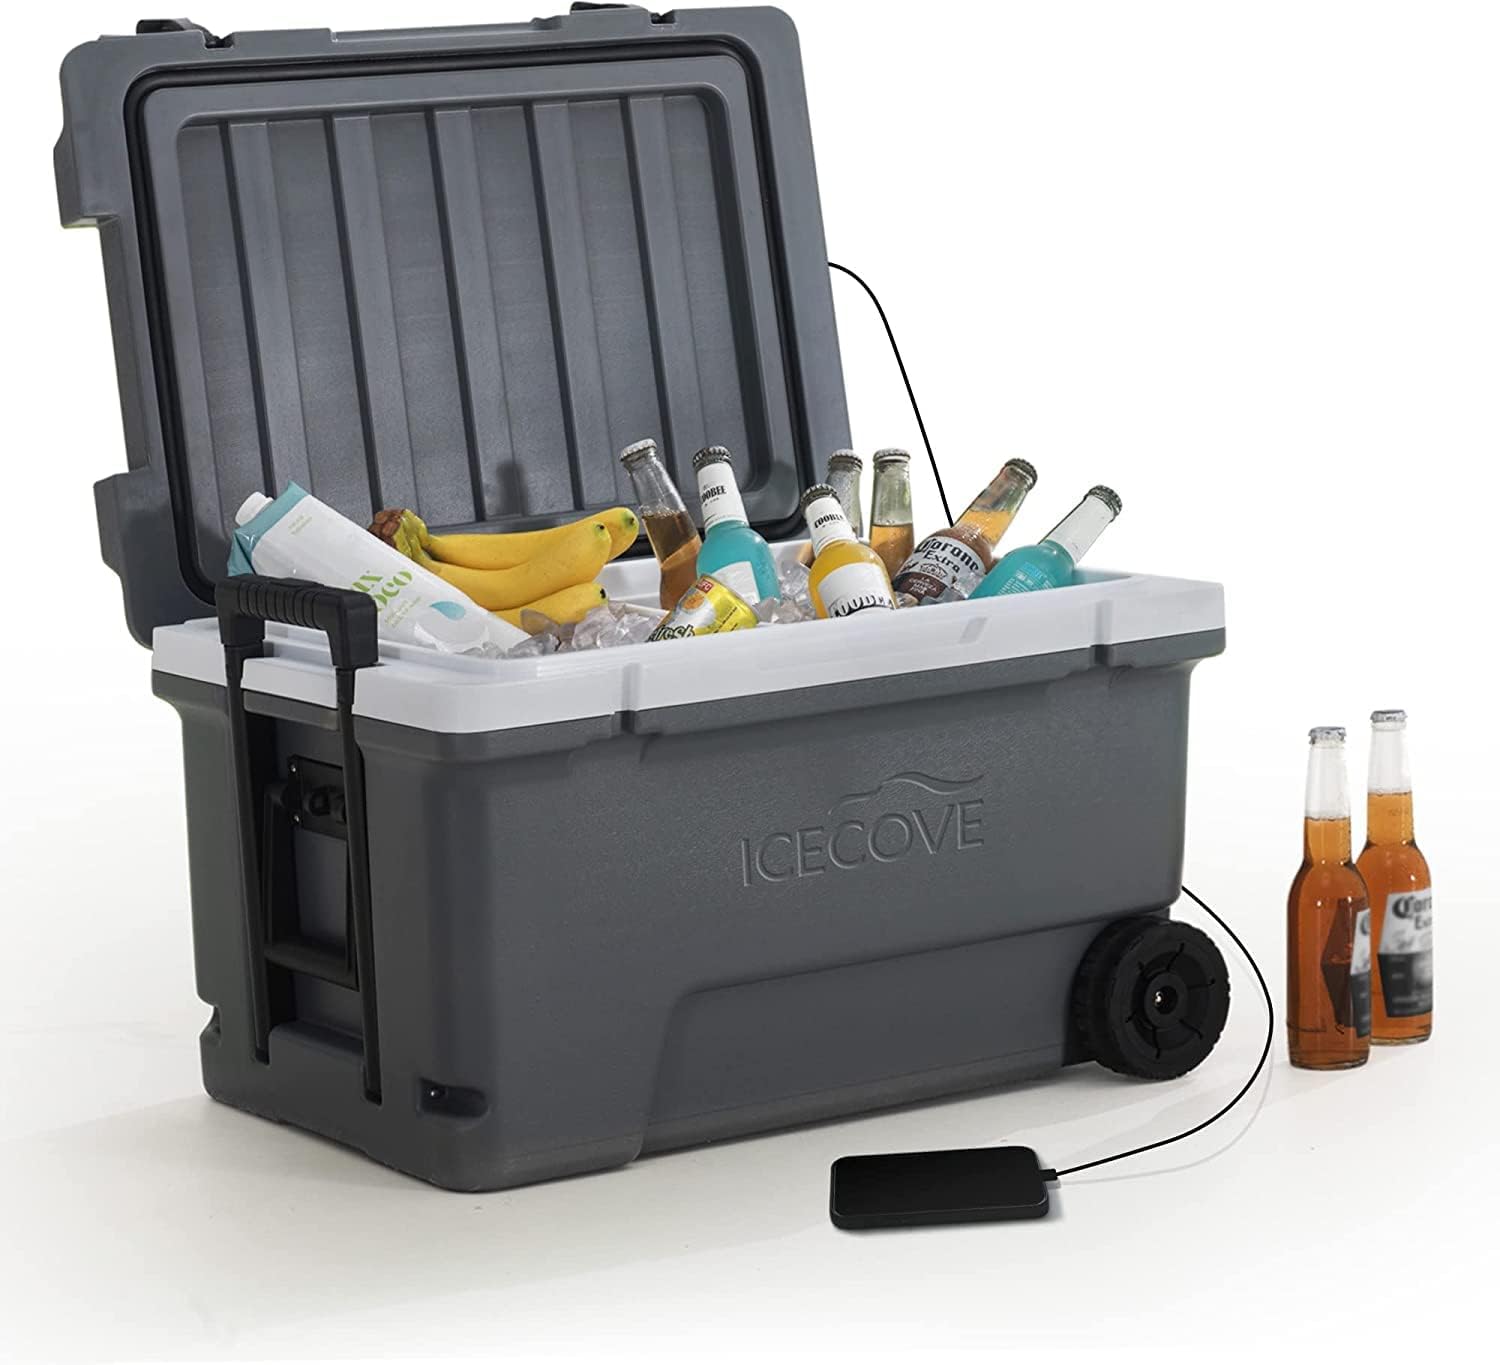 Icecove Ice Cooler Solar Powered